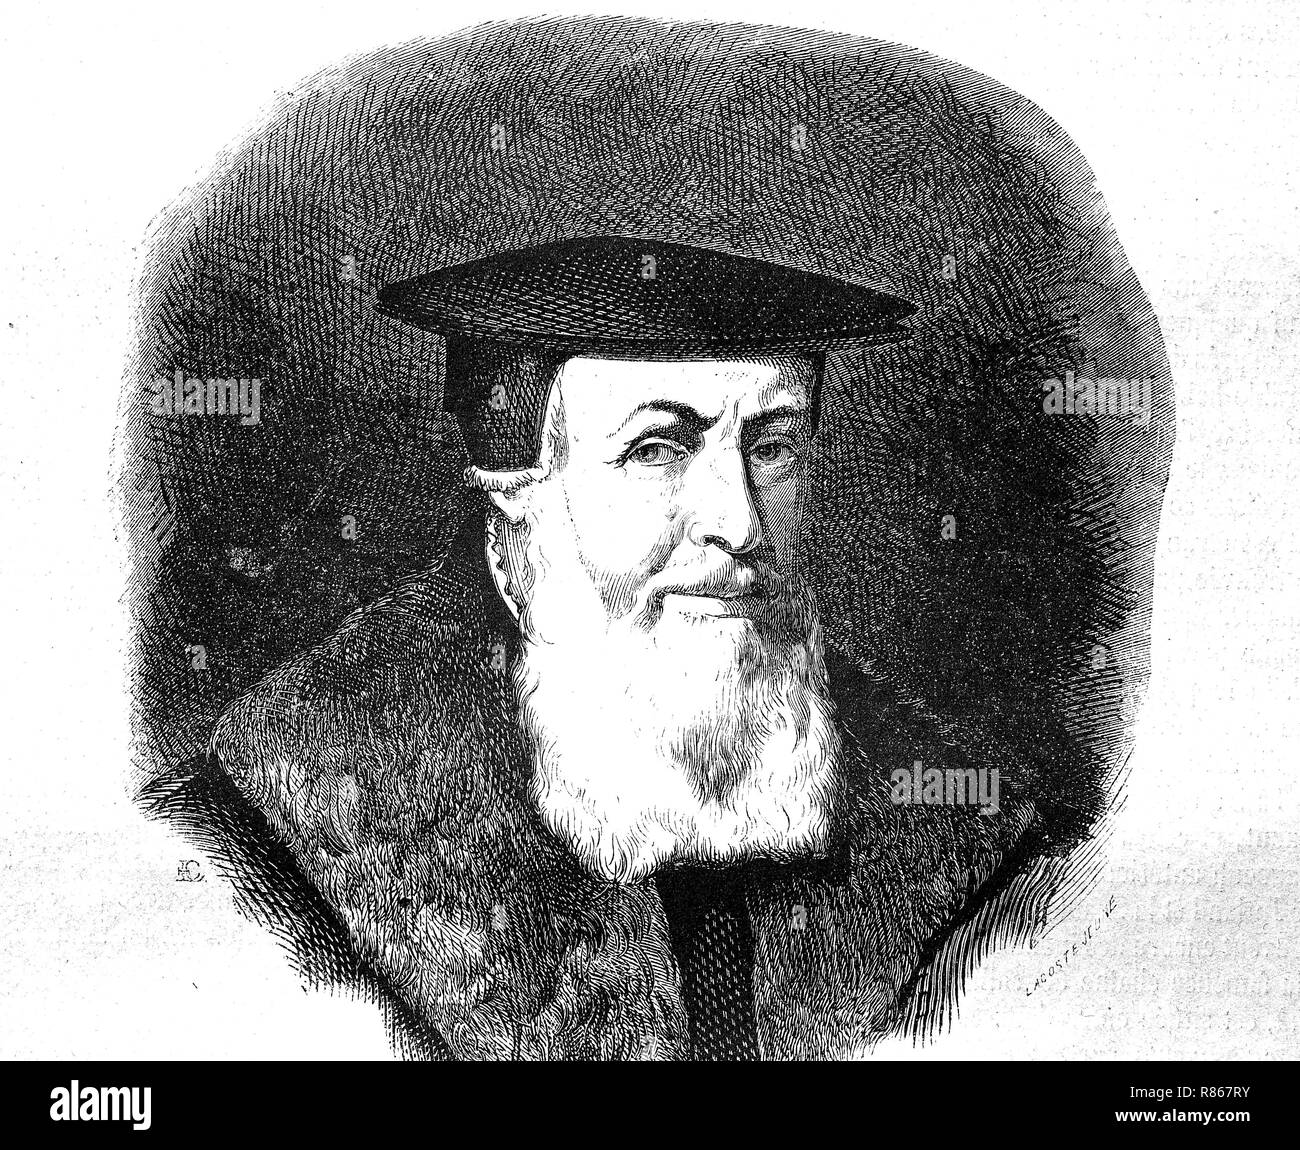 Digital improved reproduction, Johannes Gensfleisch zur Laden zum Gutenberg, 1400-1468, a German blacksmith, goldsmith, inventor, printer, and publisher who introduced printing to Europe, painting by Mathias Grunewald, from an original print from the year 1855 Stock Photo